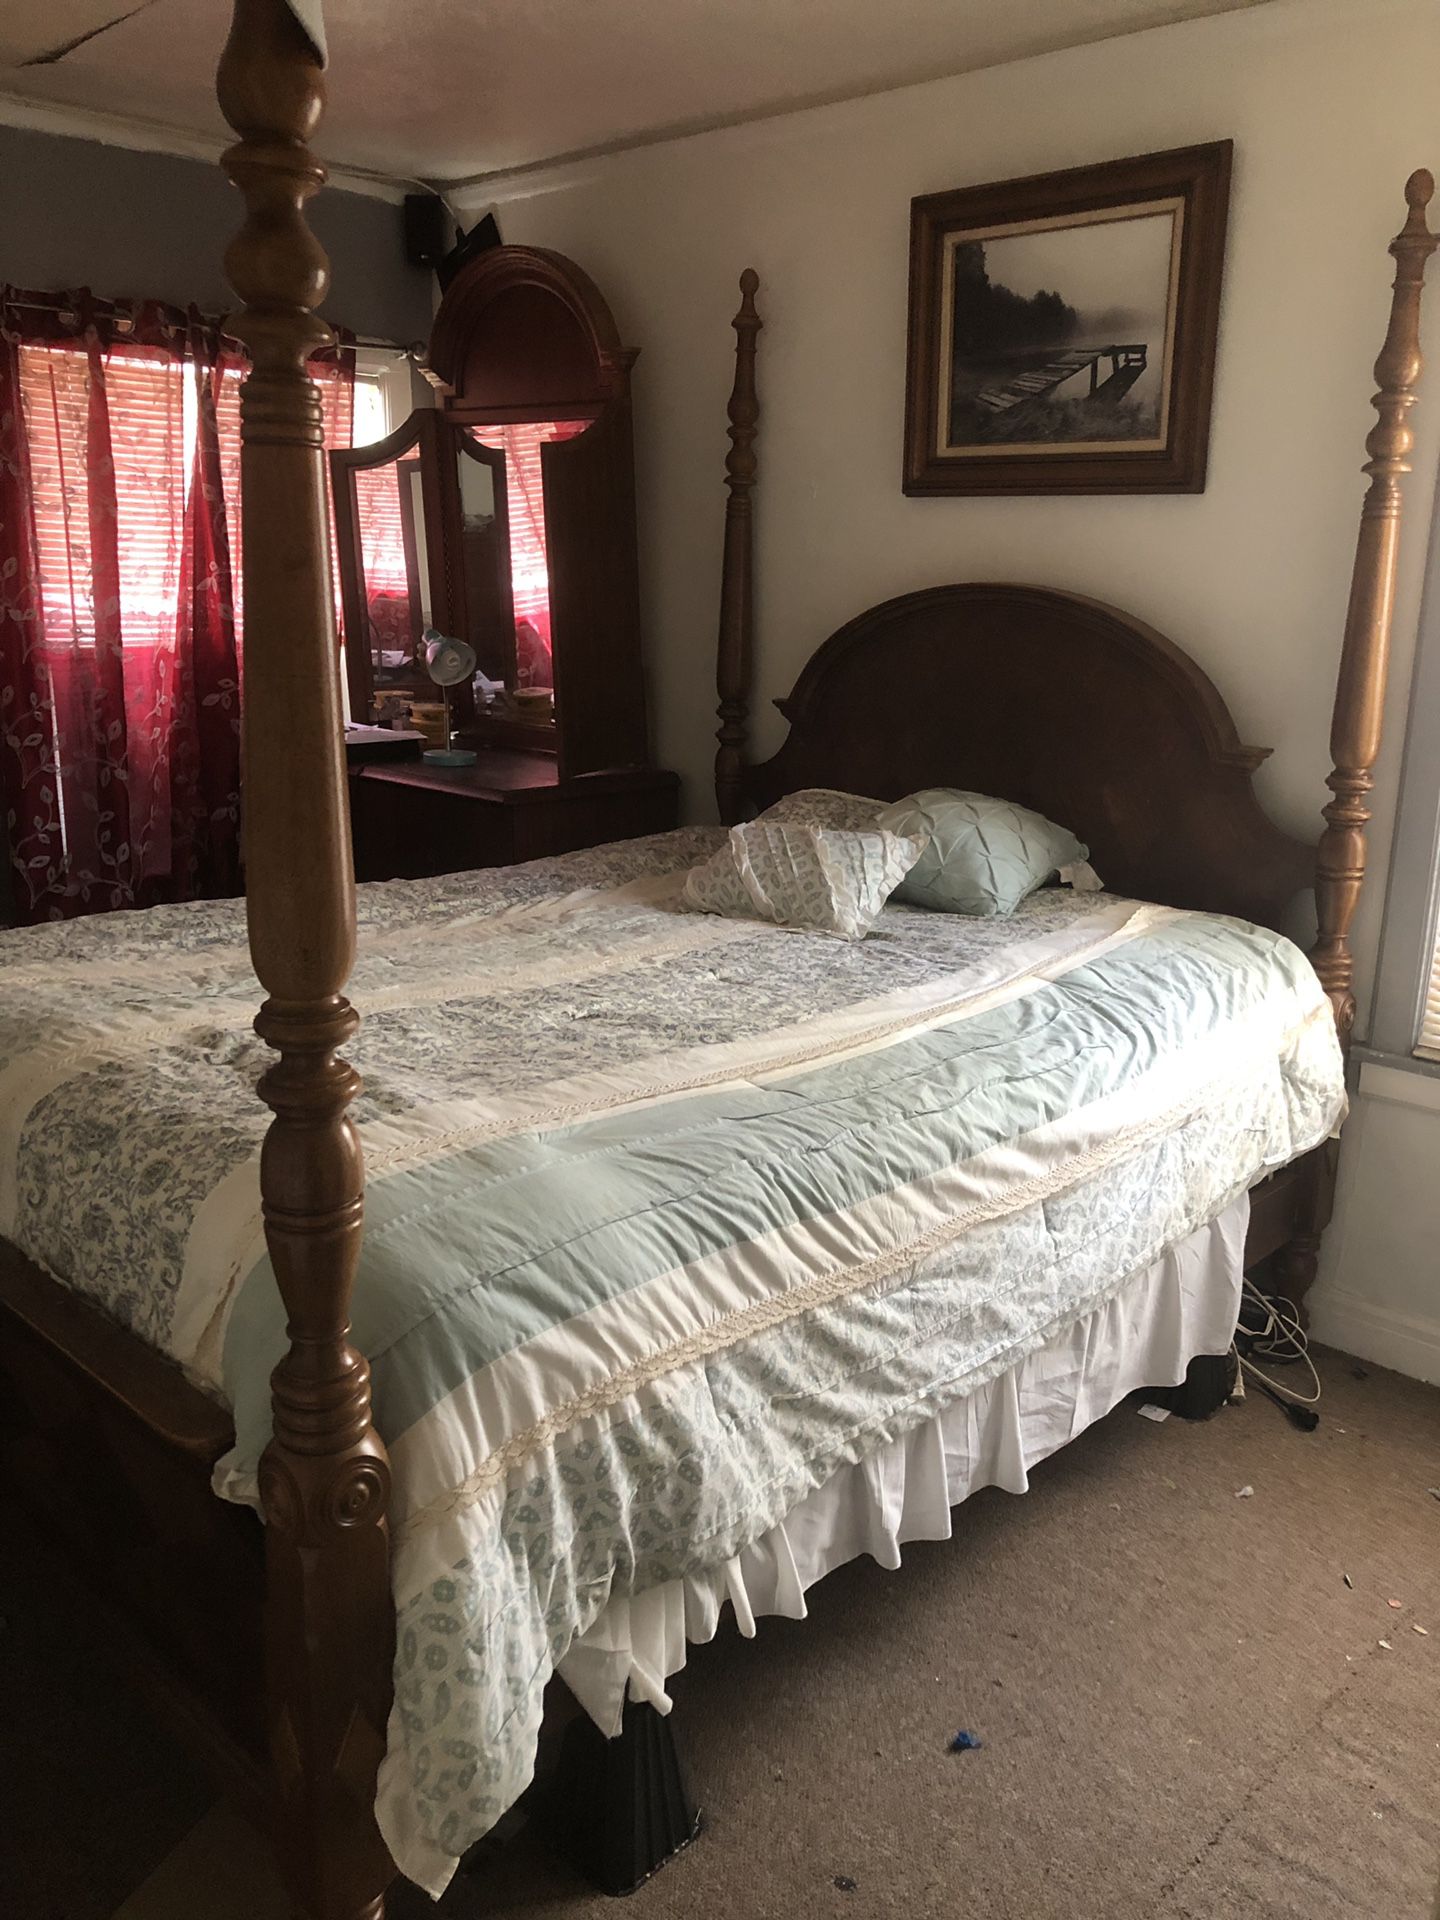 Queen size poster bed frame and box spring. Good condition. Needs a good home.